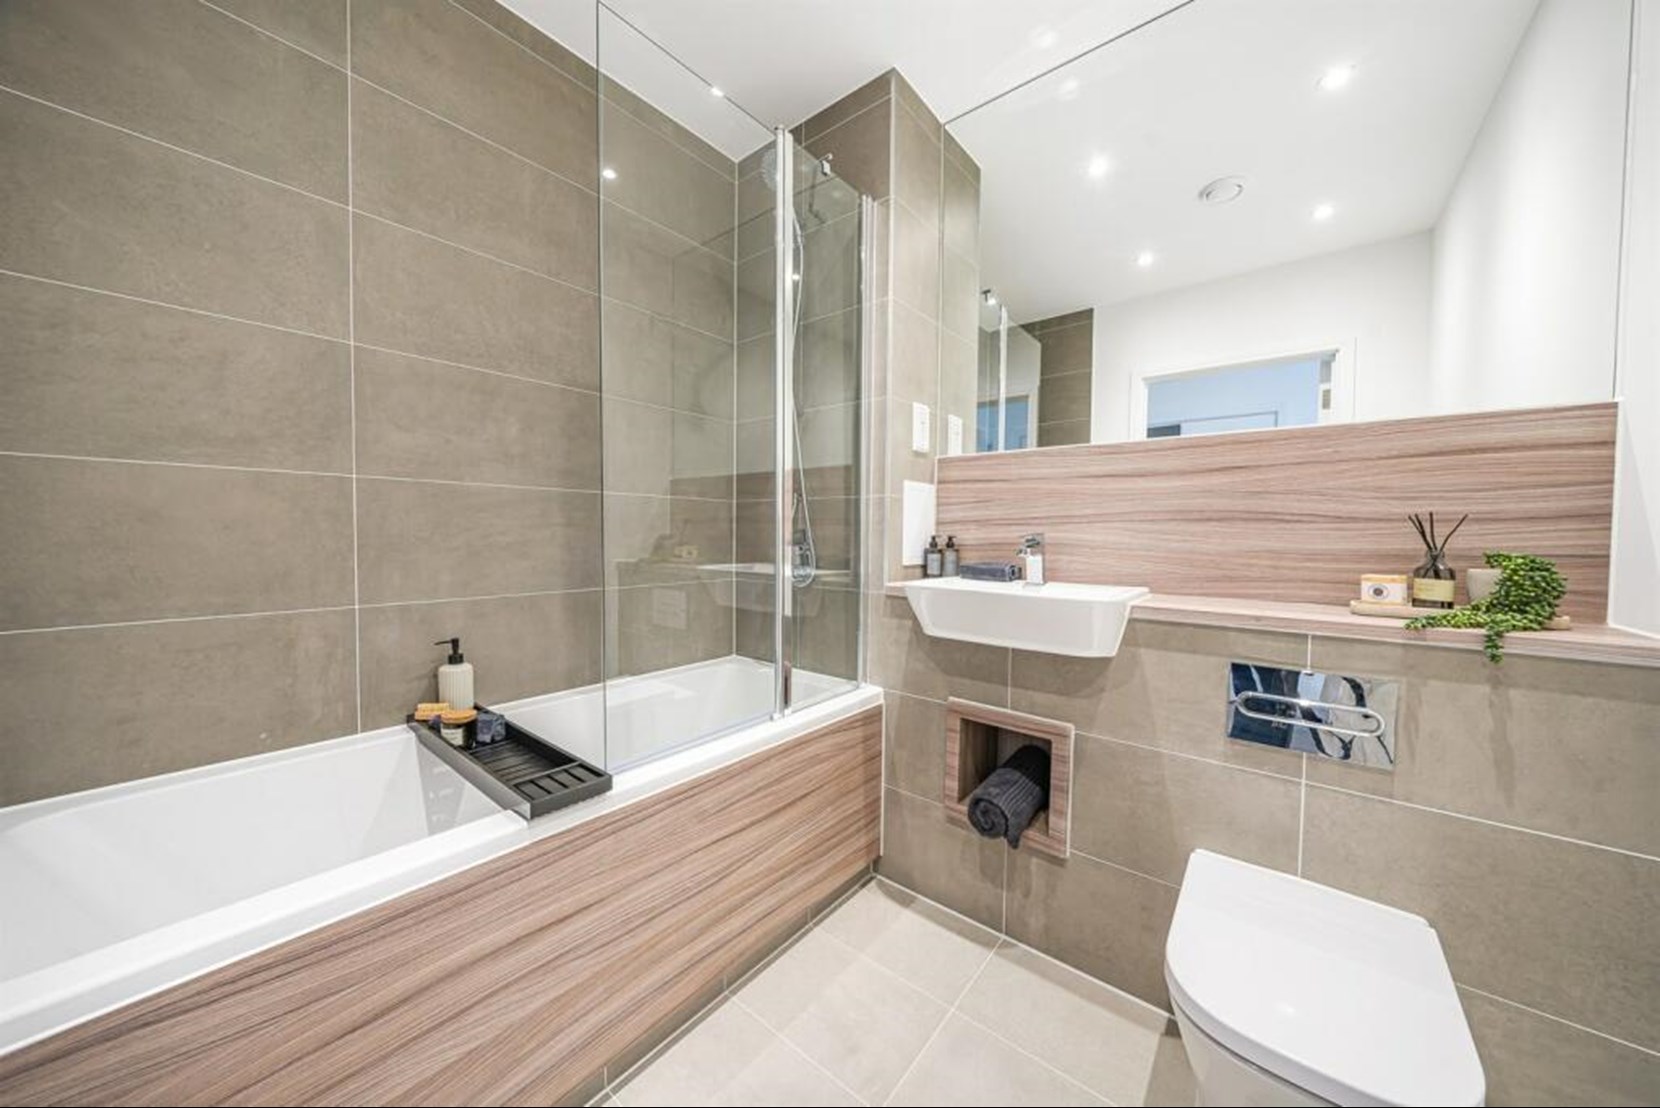 Apartments to Rent by Simple Life London in Beam Park, Havering, RM13, The Corrida bathroom